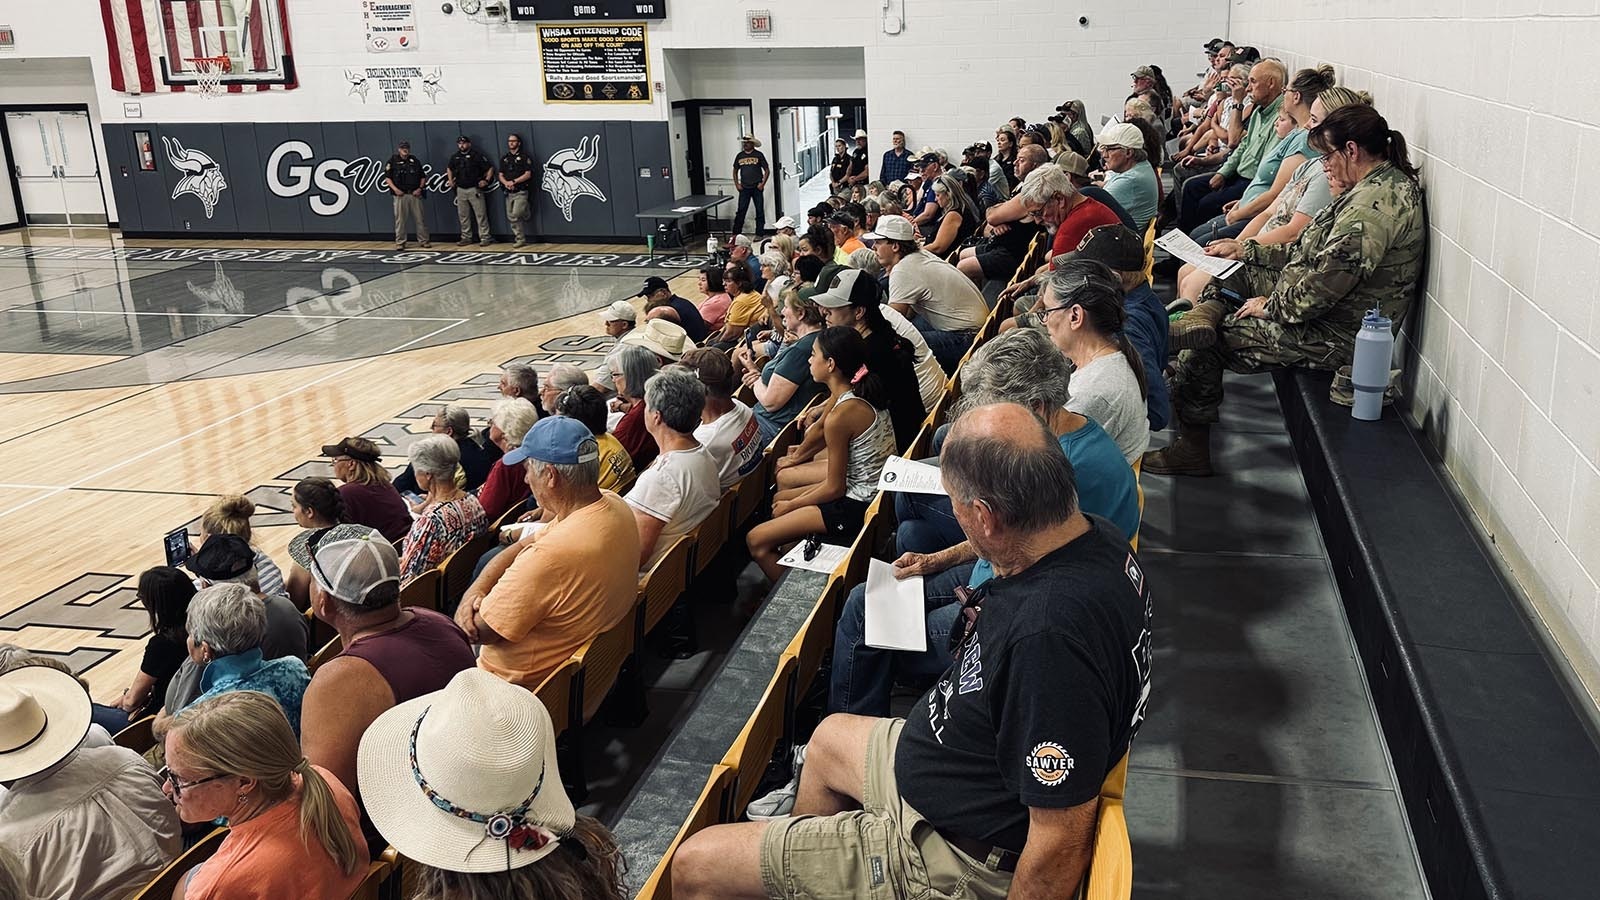 More than 200 people showed up at the Guernsey-Sunrise High School to hear Goshen and Platte County emergency officials update them on the latest with the Pleasant Valley Fire, which has burned more than 26,000 acres.